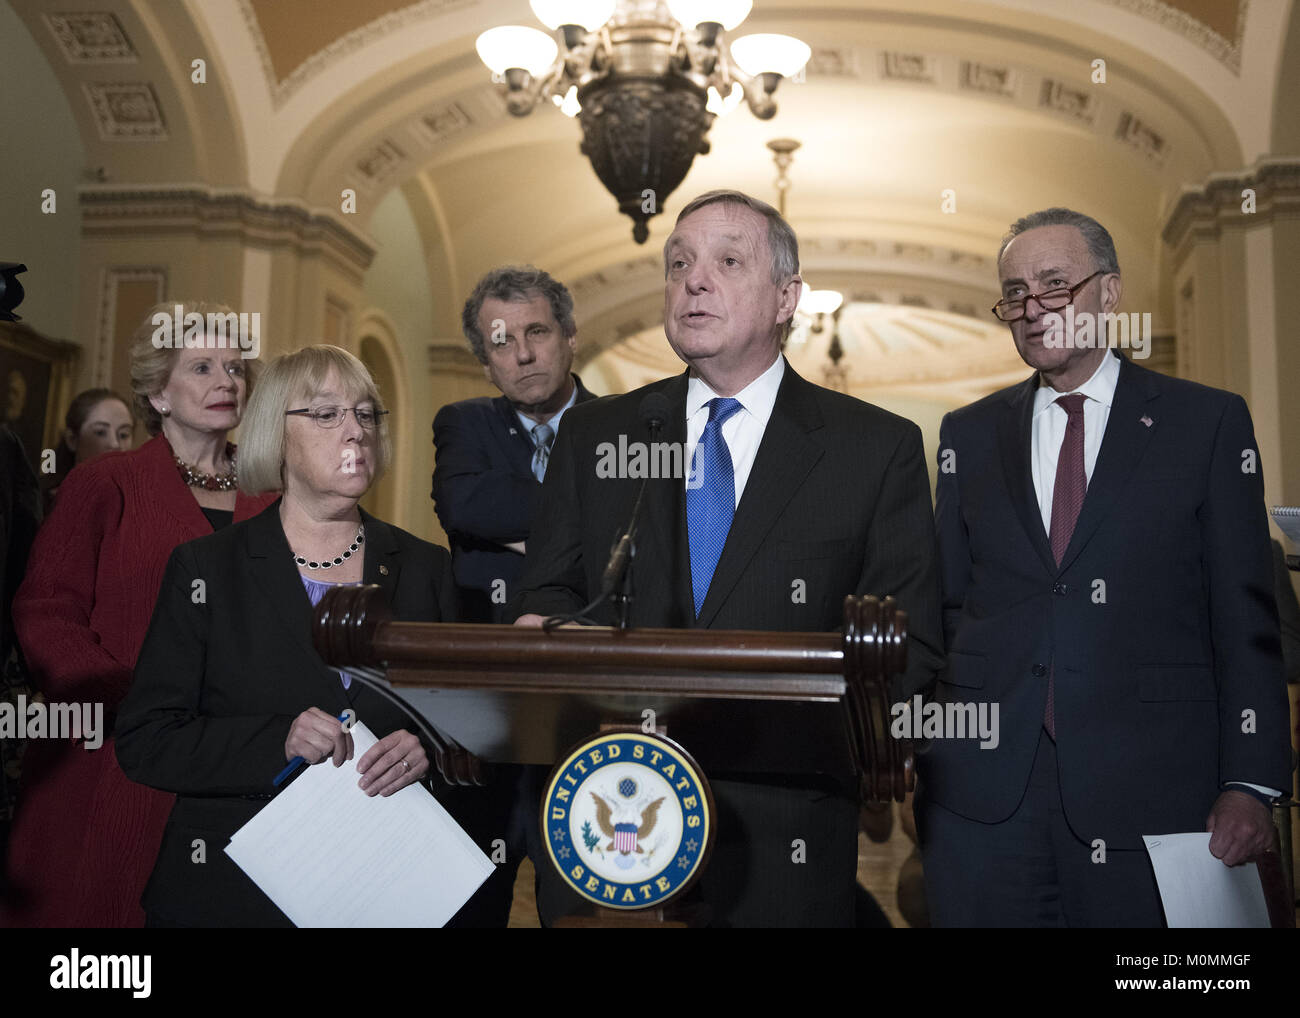 Washington, District of Columbia, USA. 23rd Jan, 2018. United States Senator Dick Durbin (Democrat of Illinois) makes remarks following the Democratic Party policy luncheon in the US Capitol in Washington, DC on Tuesday, January 23, 2018. From left to right: US Senator Debbie Stabenow (Democrat of Michigan), US Senator Patty Murray (Democrat of Washington), US Senator Sherrod Brown (Democrat of Ohio), Senator Durbin, and US Senate Majority Leader Chuck Schumer (Democrat of New York).Credit: Ron Sachs/CNP Credit: Ron Sachs/CNP/ZUMA Wire/Alamy Live News Stock Photo